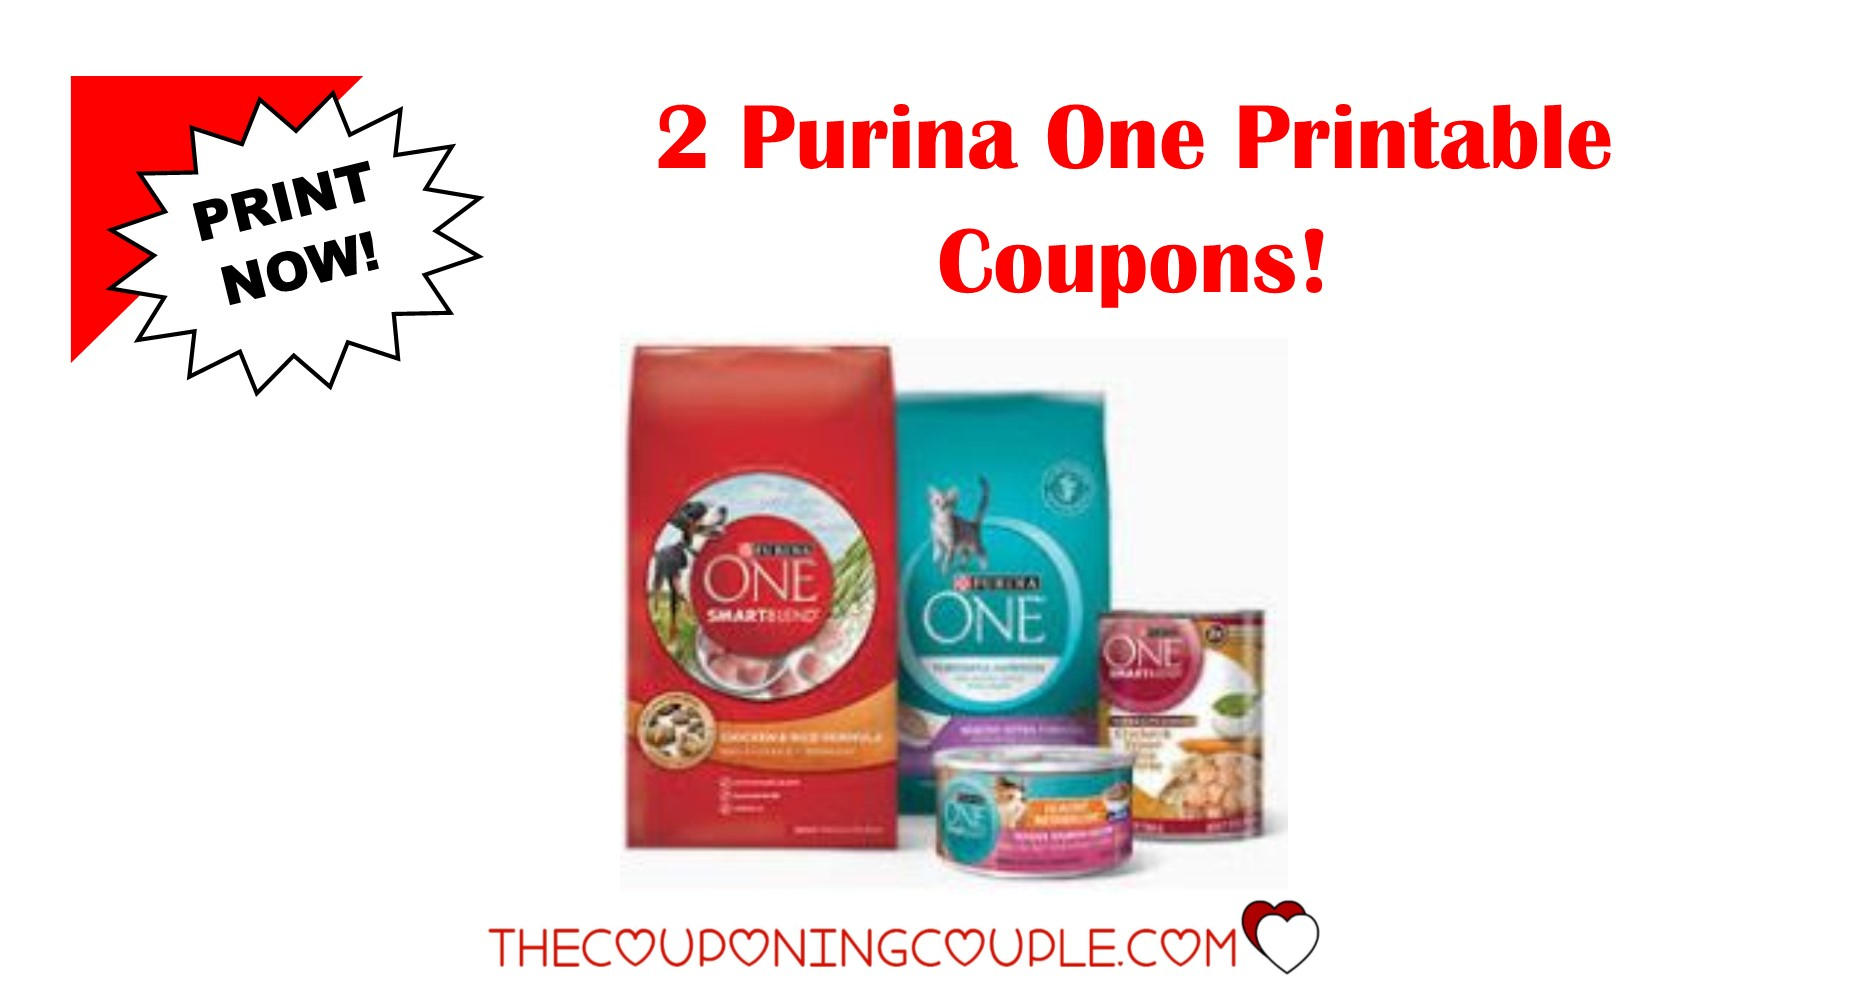 2 Purina One Printable Coupons ~ Both Coupons Are B1G1! - Free Printable Coupons For Purina One Dog Food